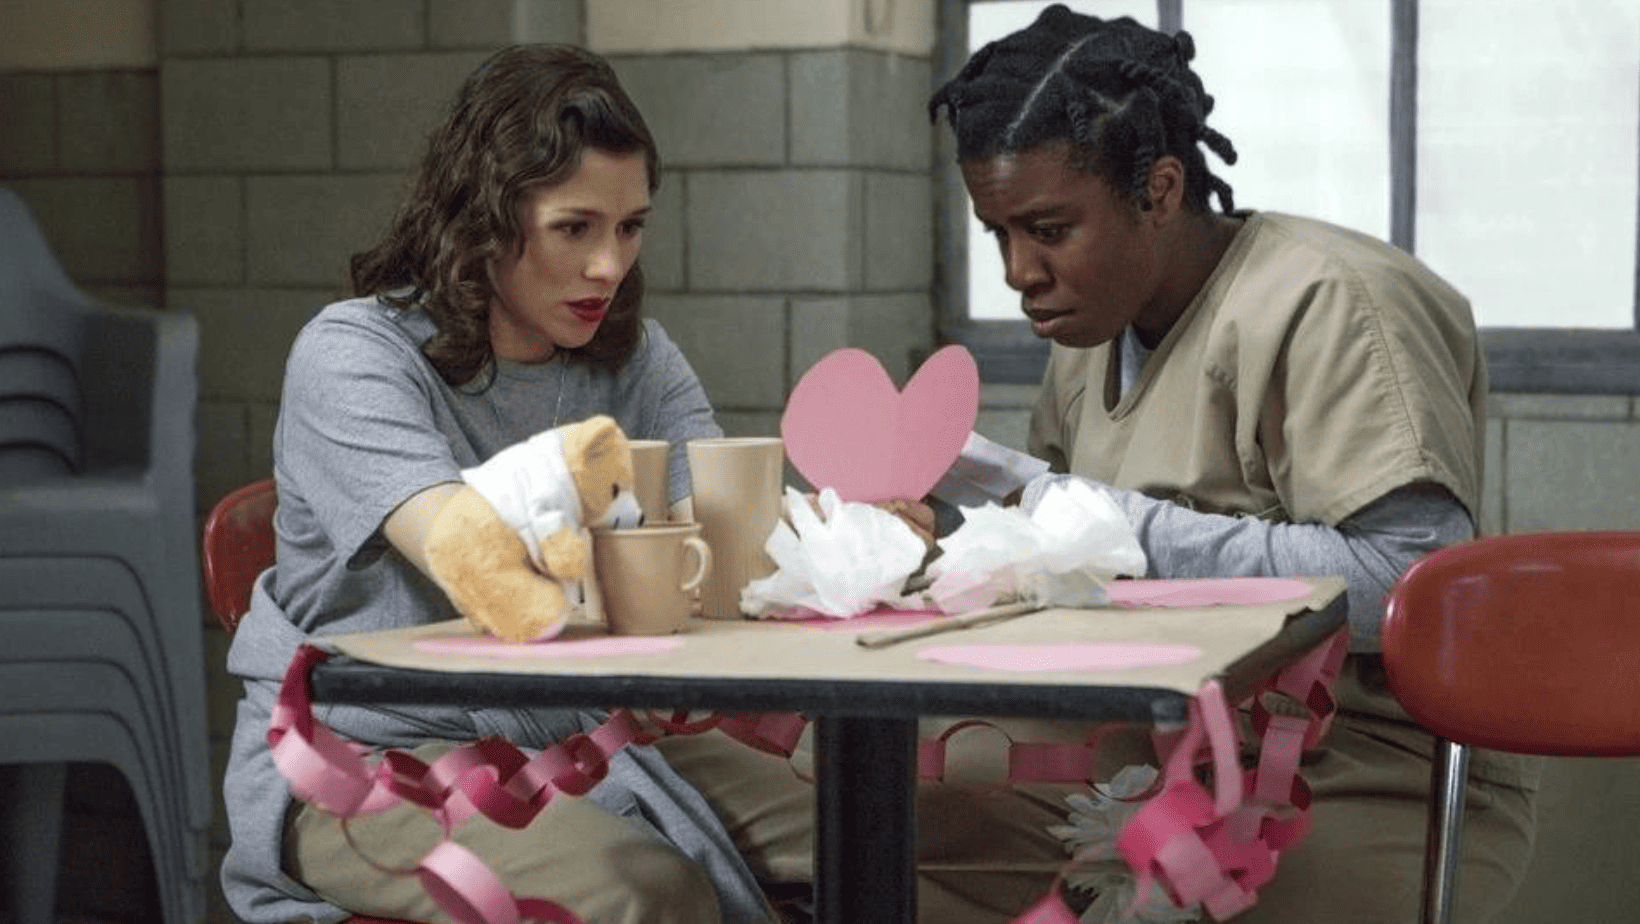 Two women in prison uniforms sit at a table with Valentine’s Day decorations in this image from Tilted Productions.